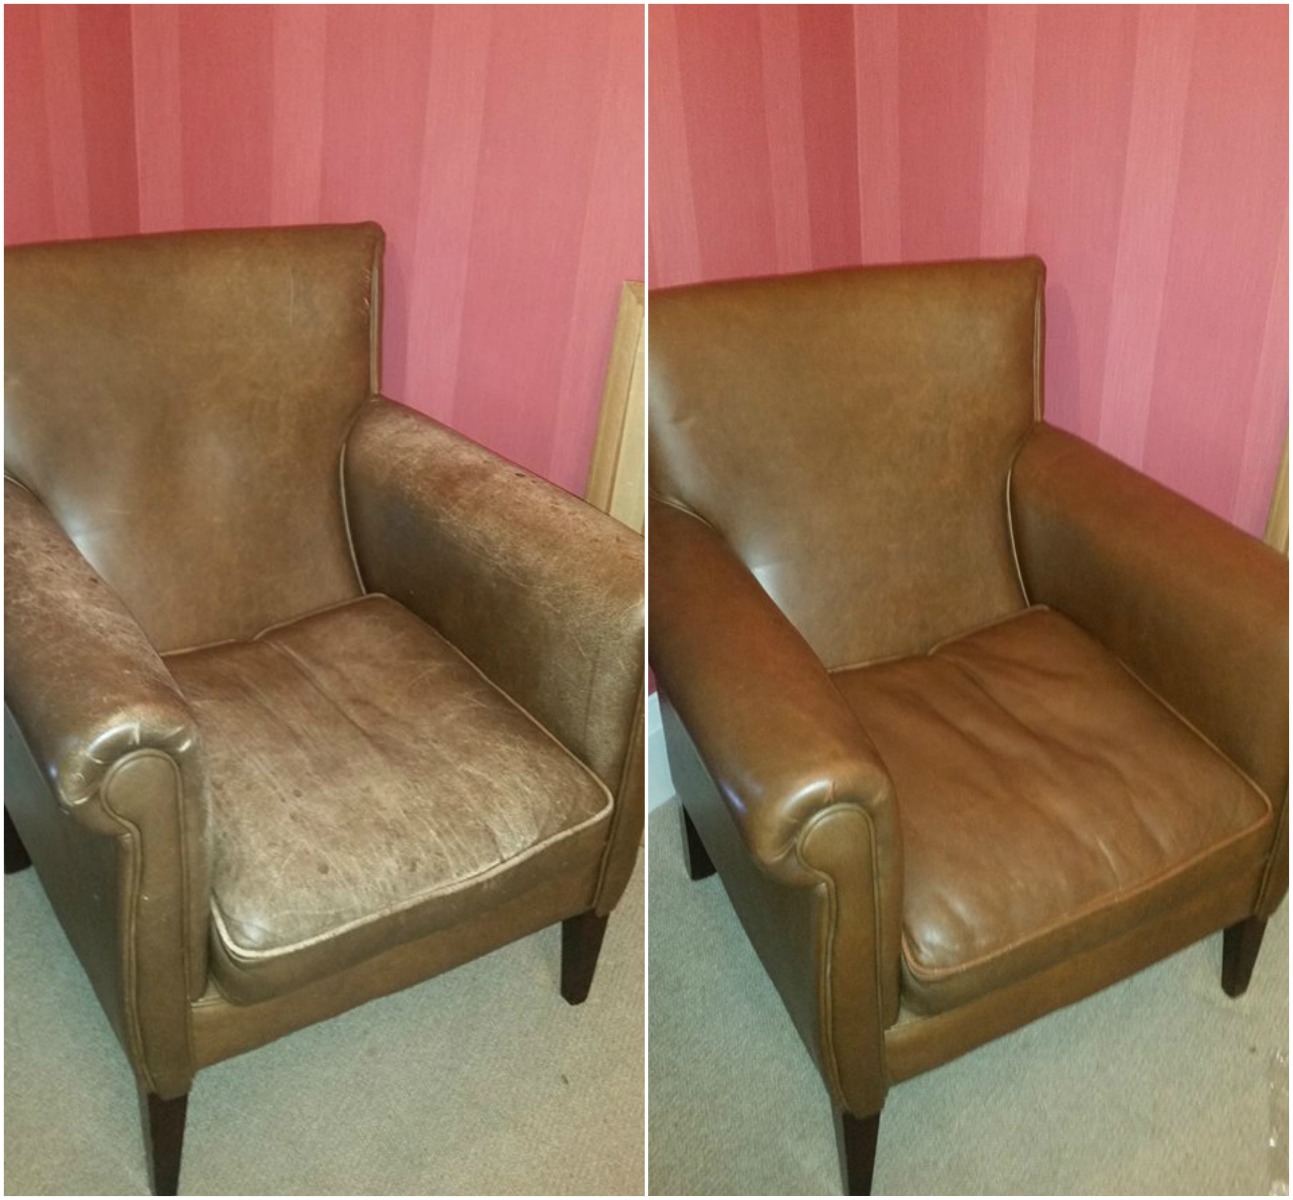 Restoring Colour To A Faded Leather Sofa, Faded Leather Repair Kit